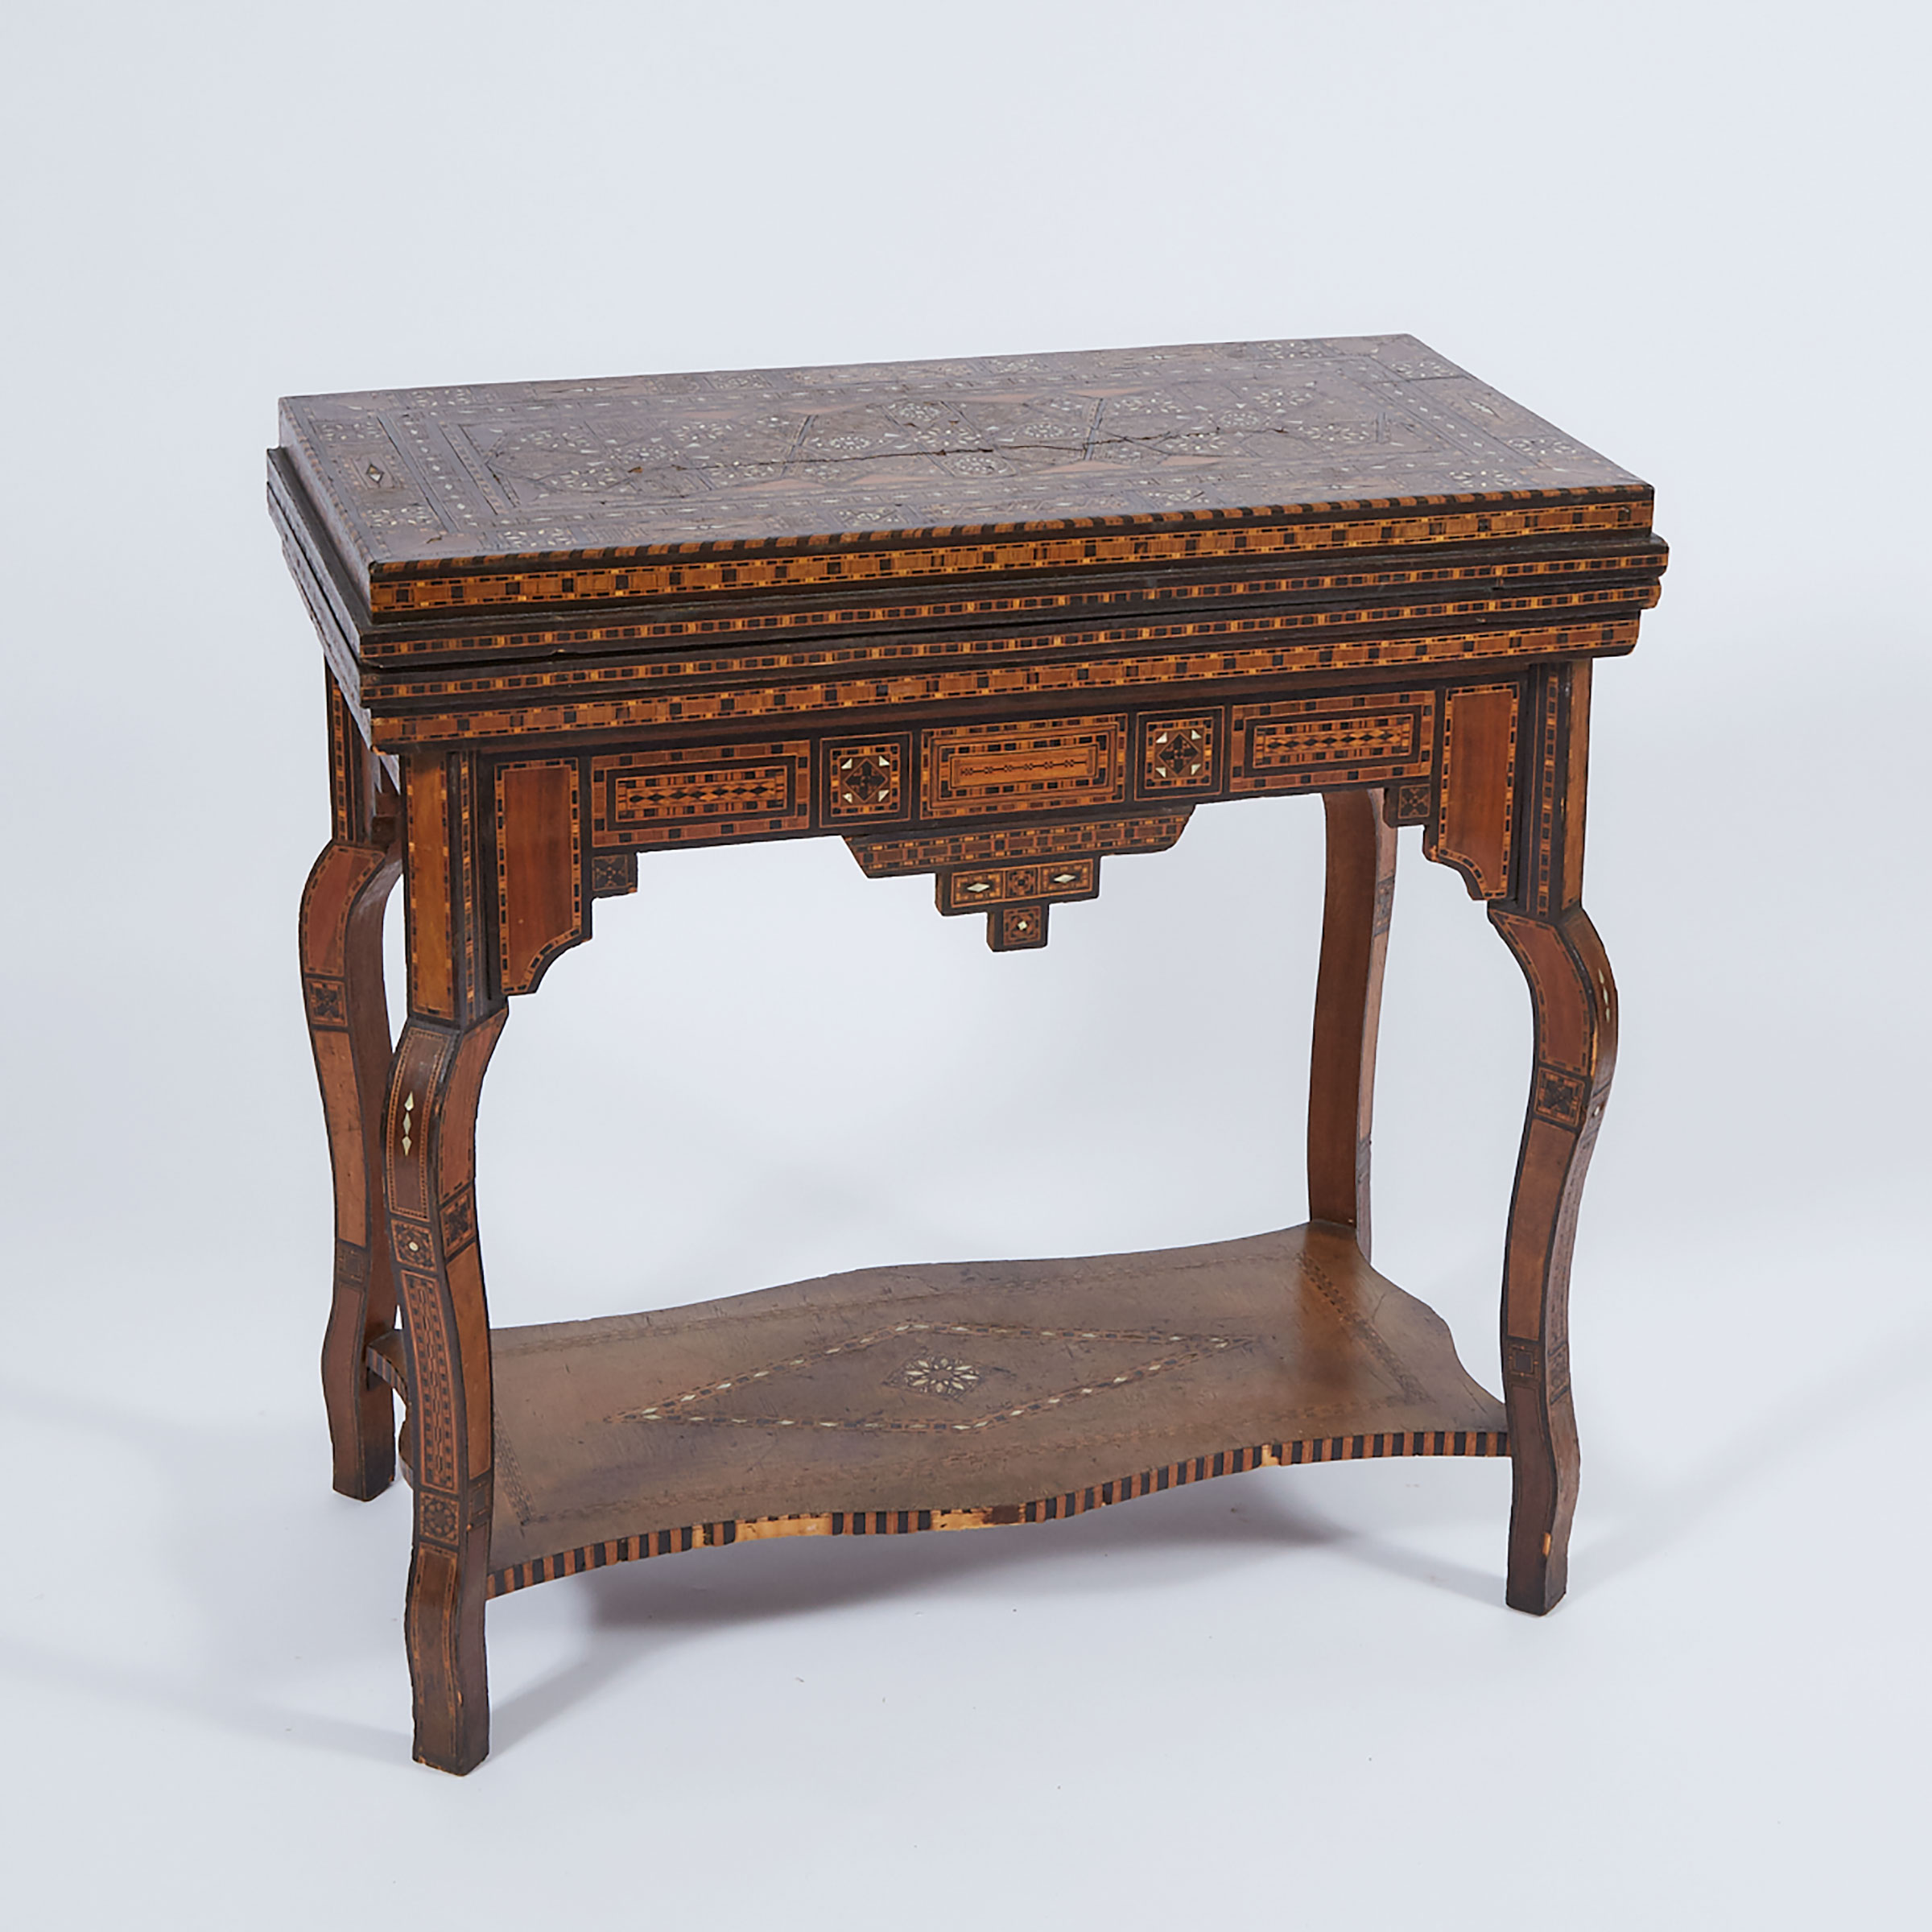 Syrian Parquetry Inlaid Fold-Over  Games Table, 19th/early 20th century